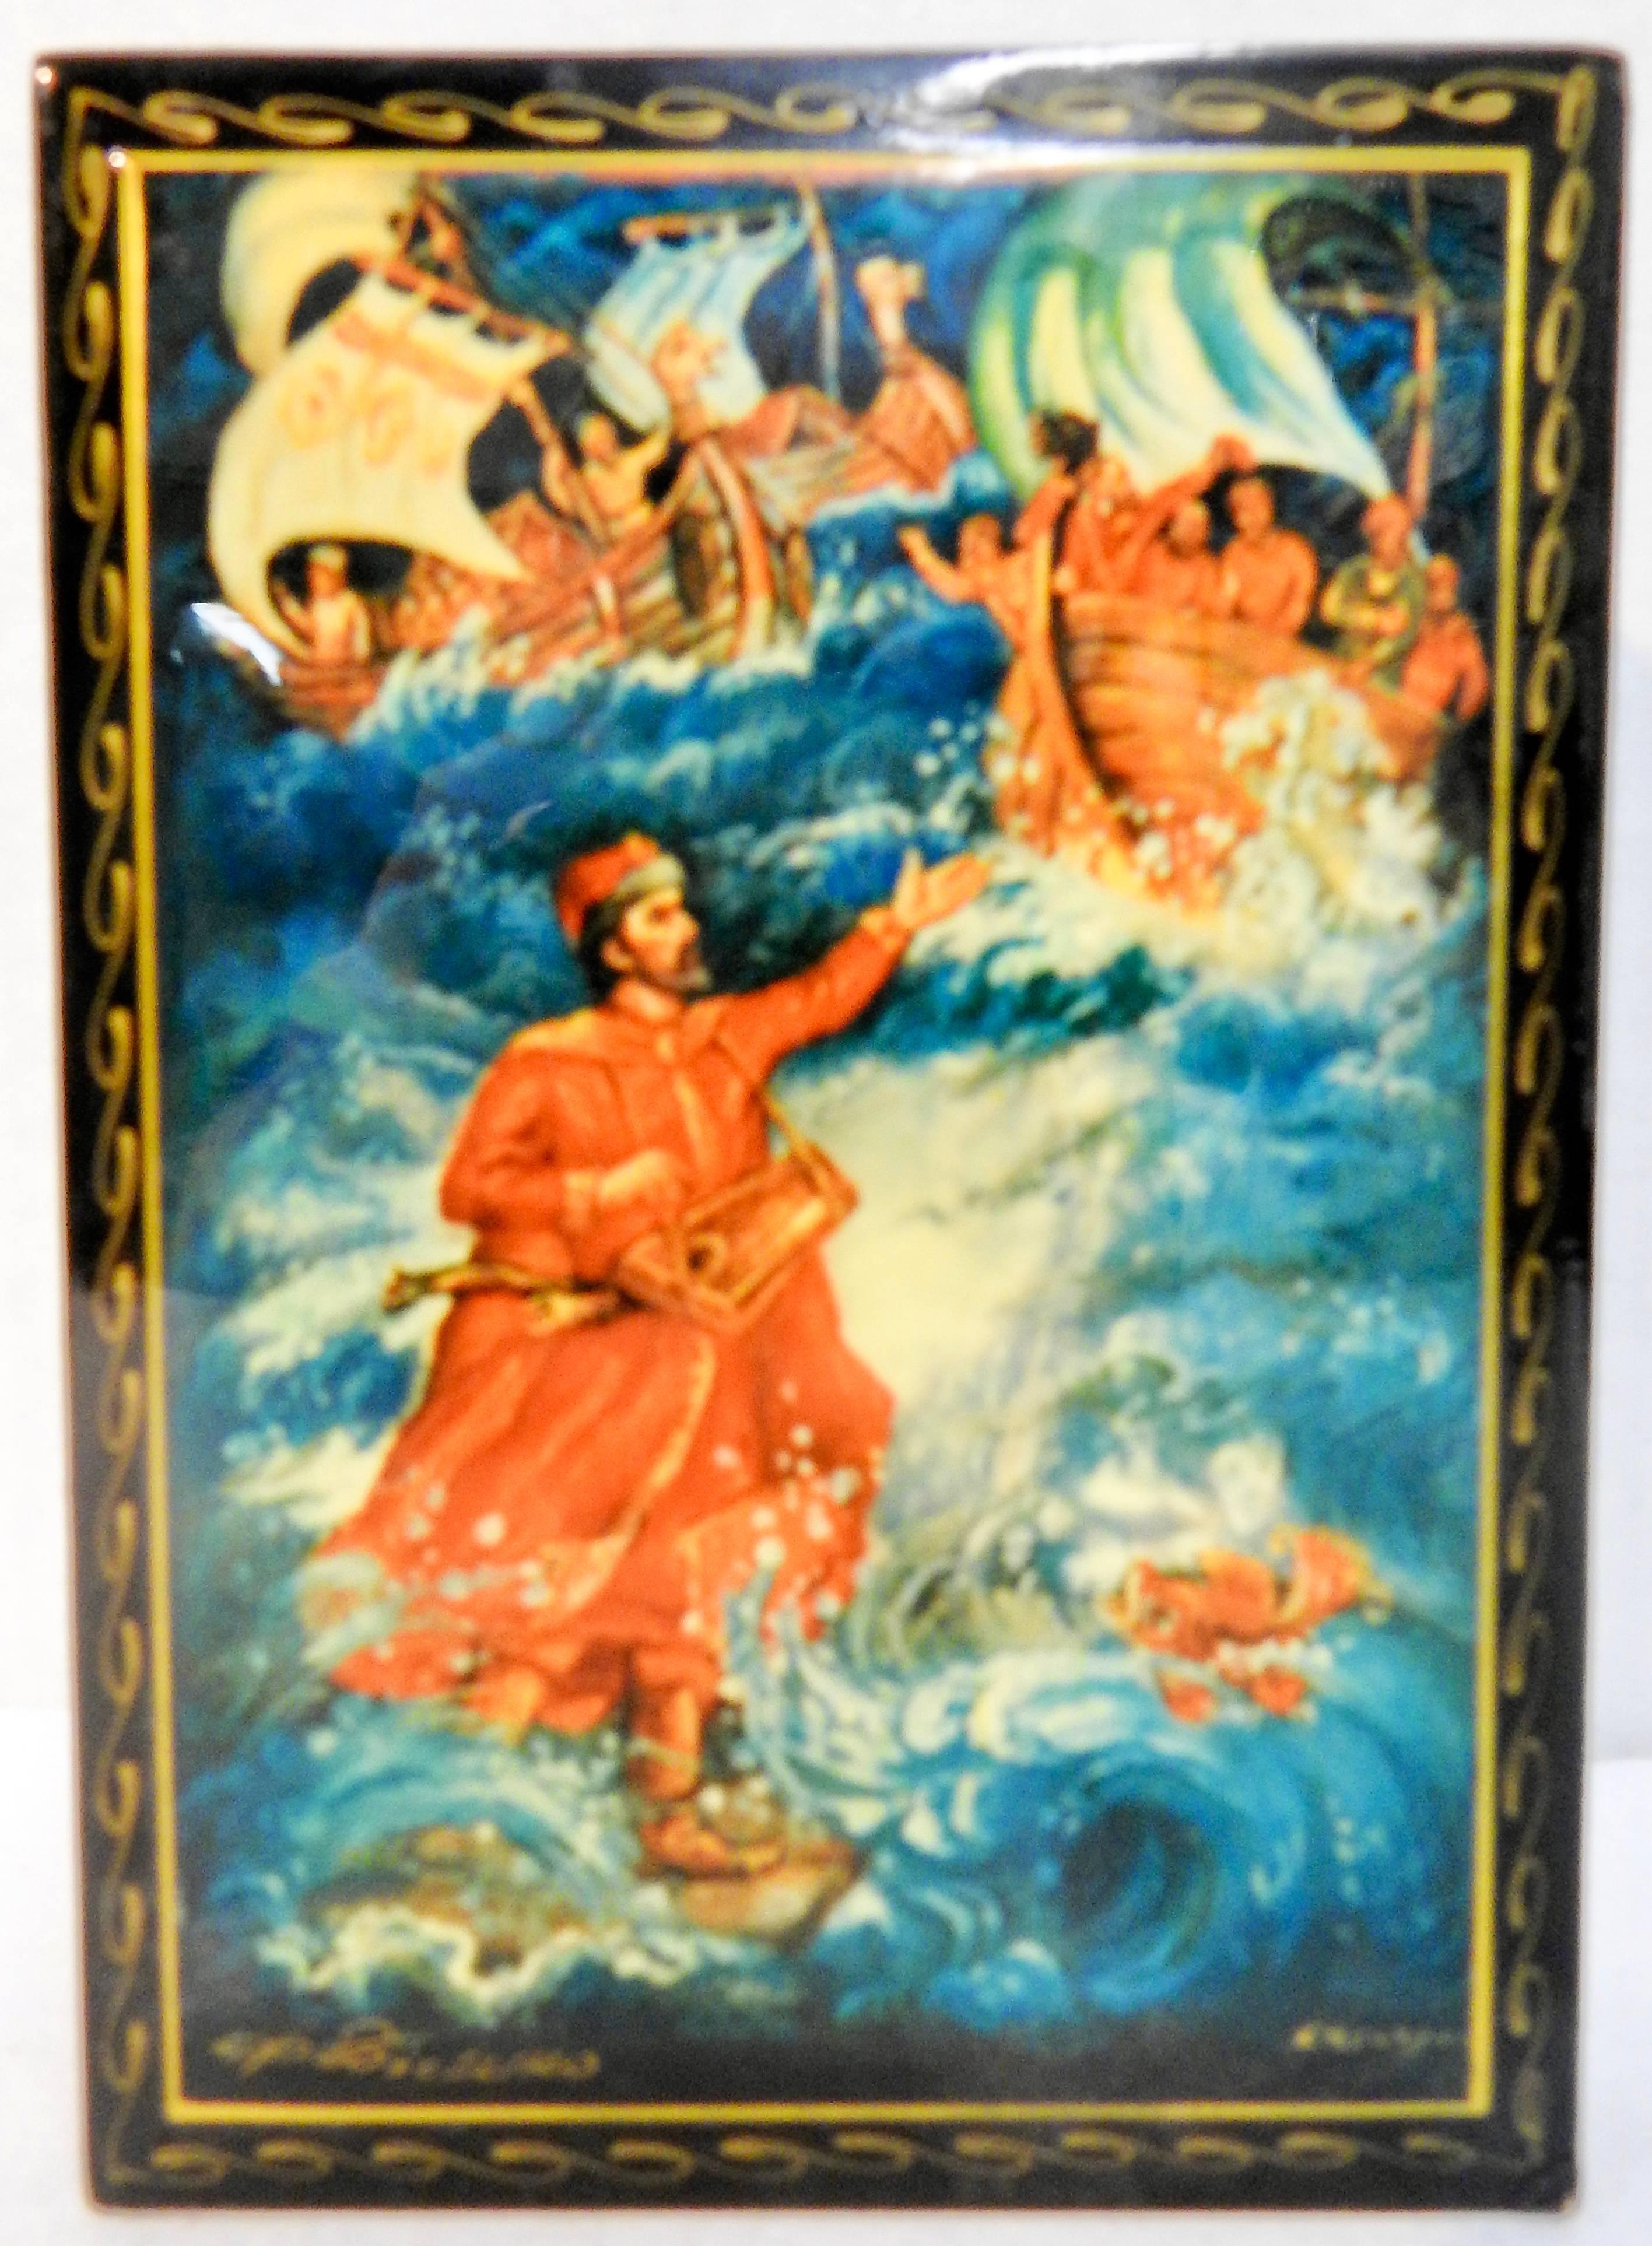 Fierce waves surround the characters and fish on this Russian black lacquer box. The inside opens to a vibrant red. The edges of the box are decorated with waves of gold. The top has been signed but we could not identify the artist.